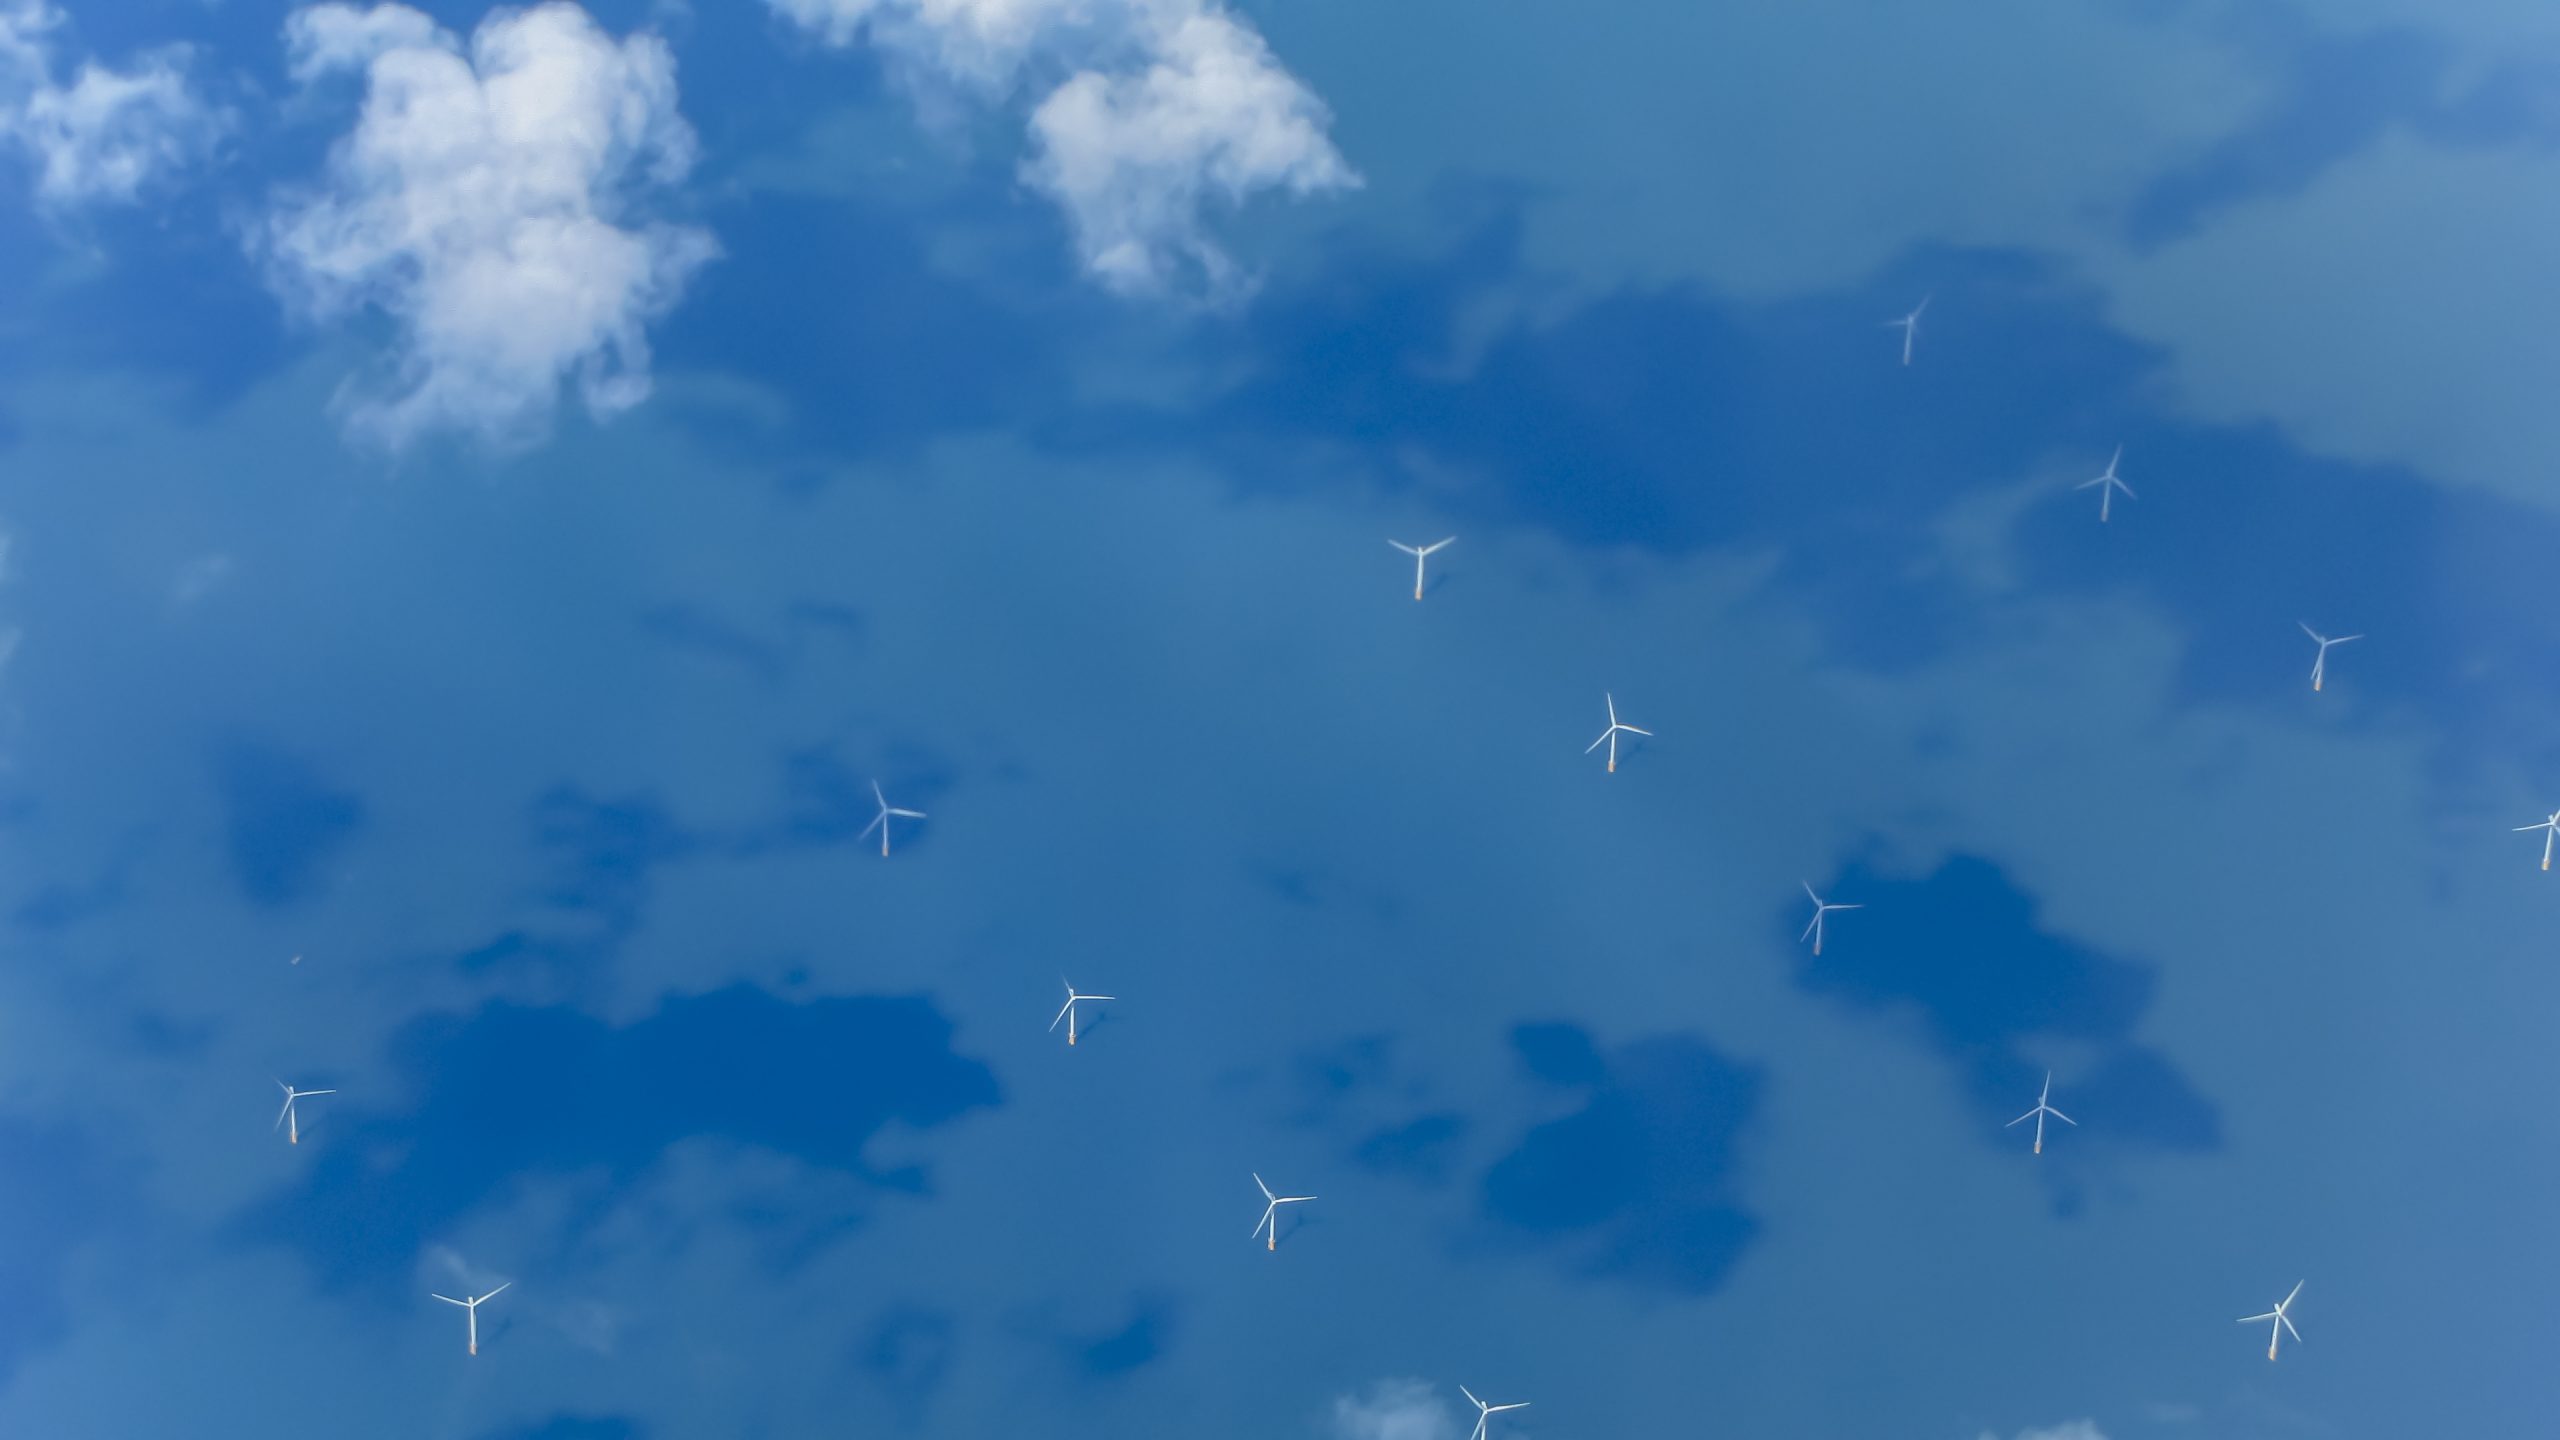 View of Wind Turbines Generating Electricity in English Channel from Aircraft